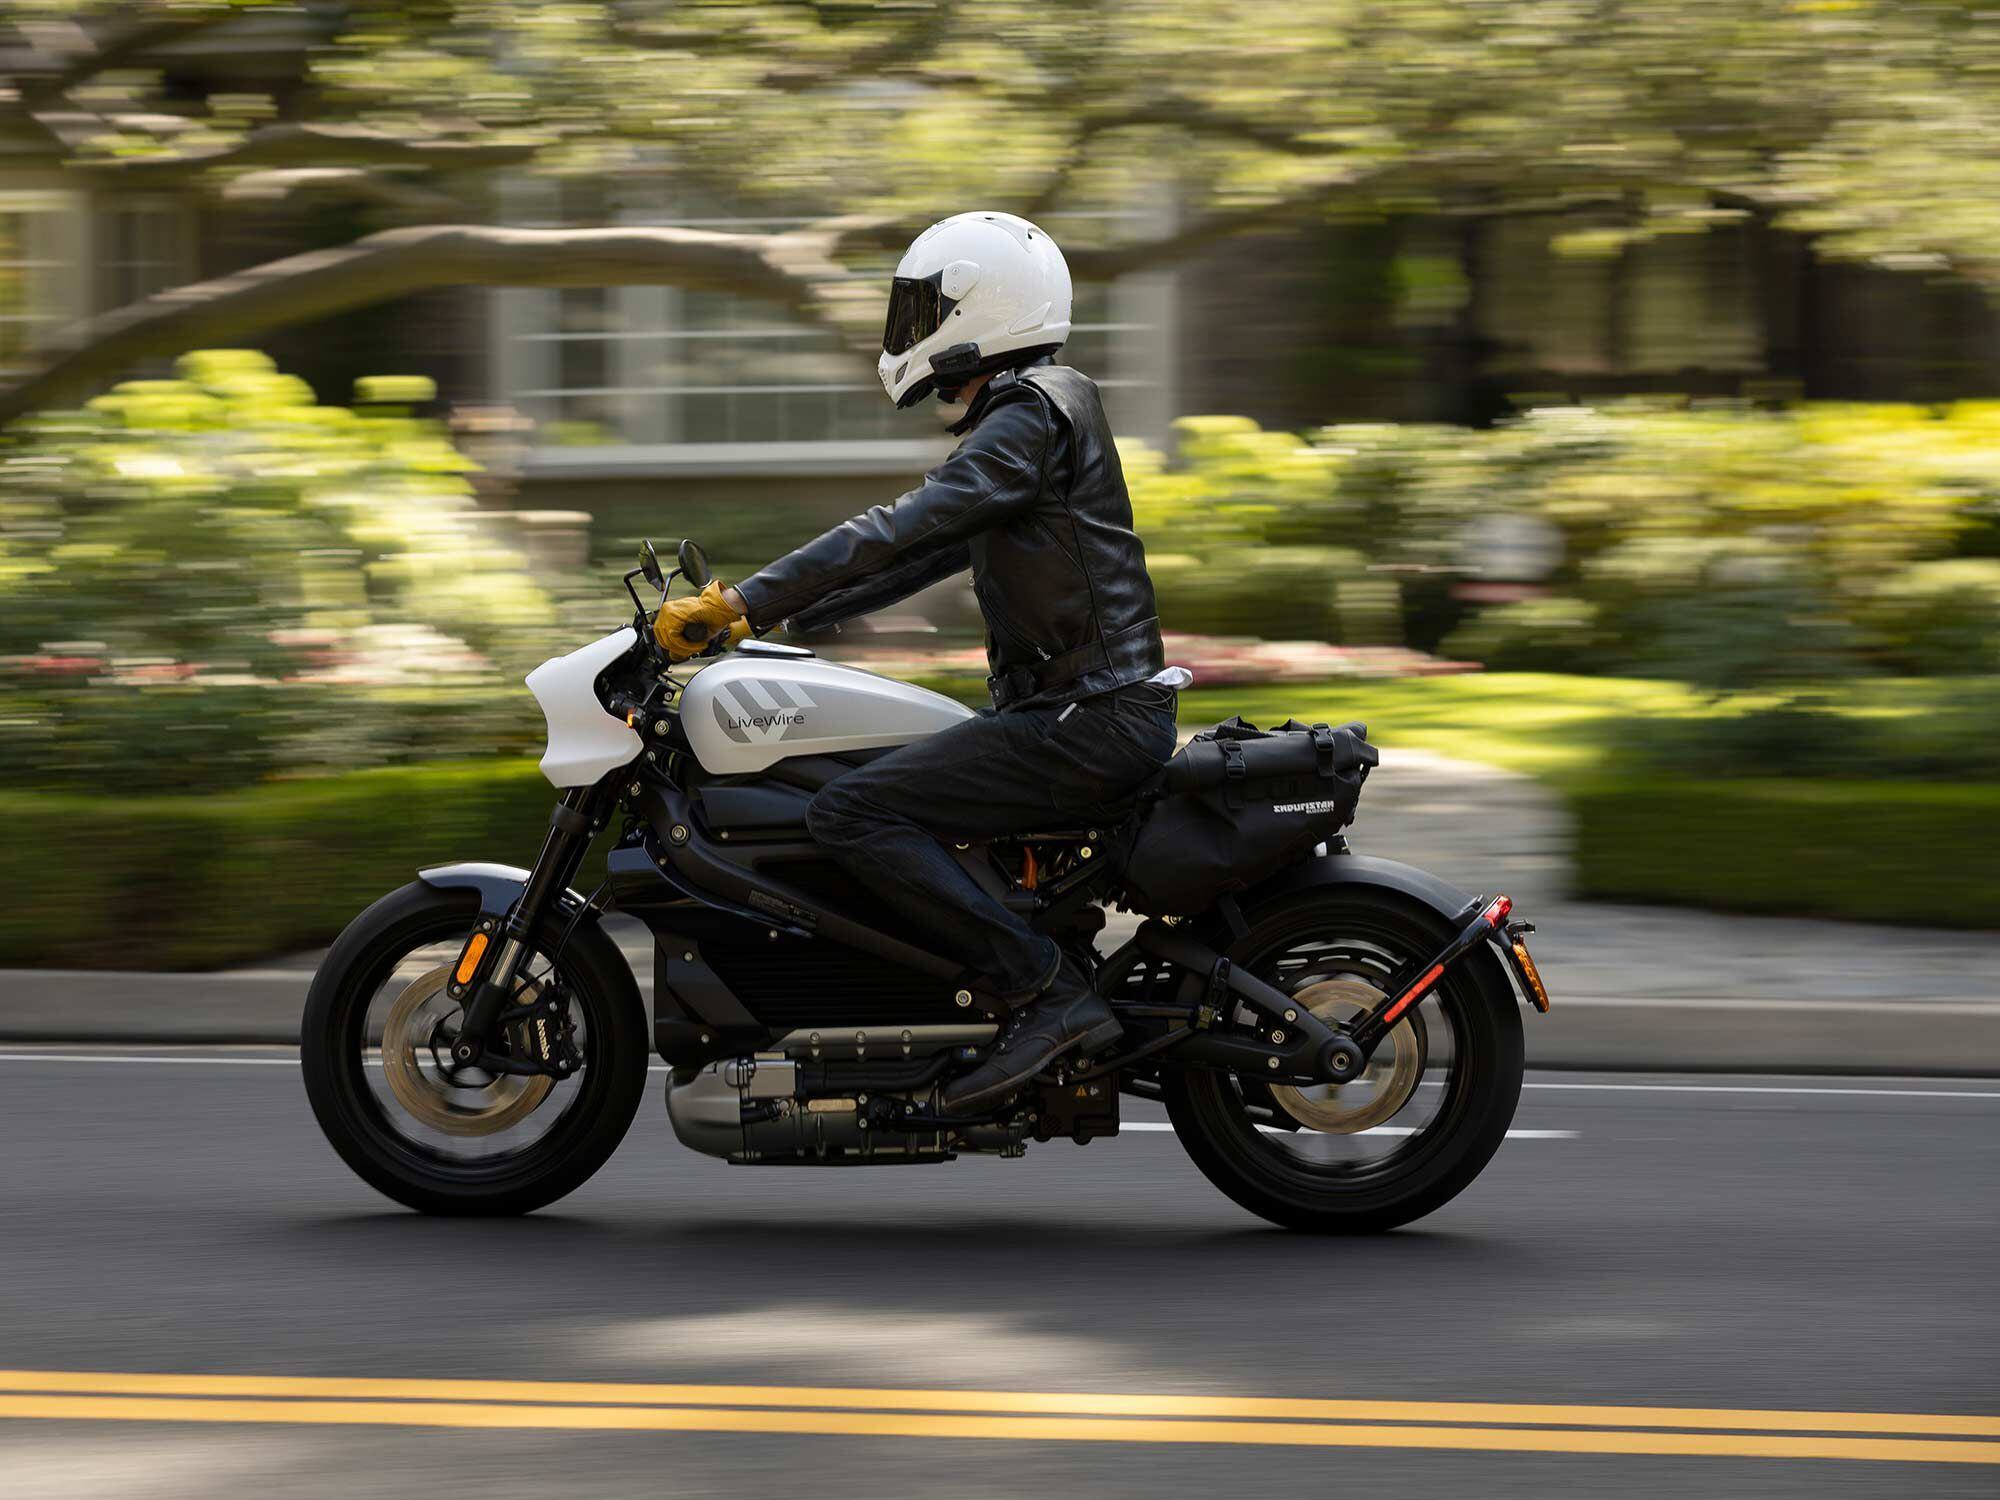 LiveWire claims the 15.4kWh battery can provide 146 miles of in-city riding power.